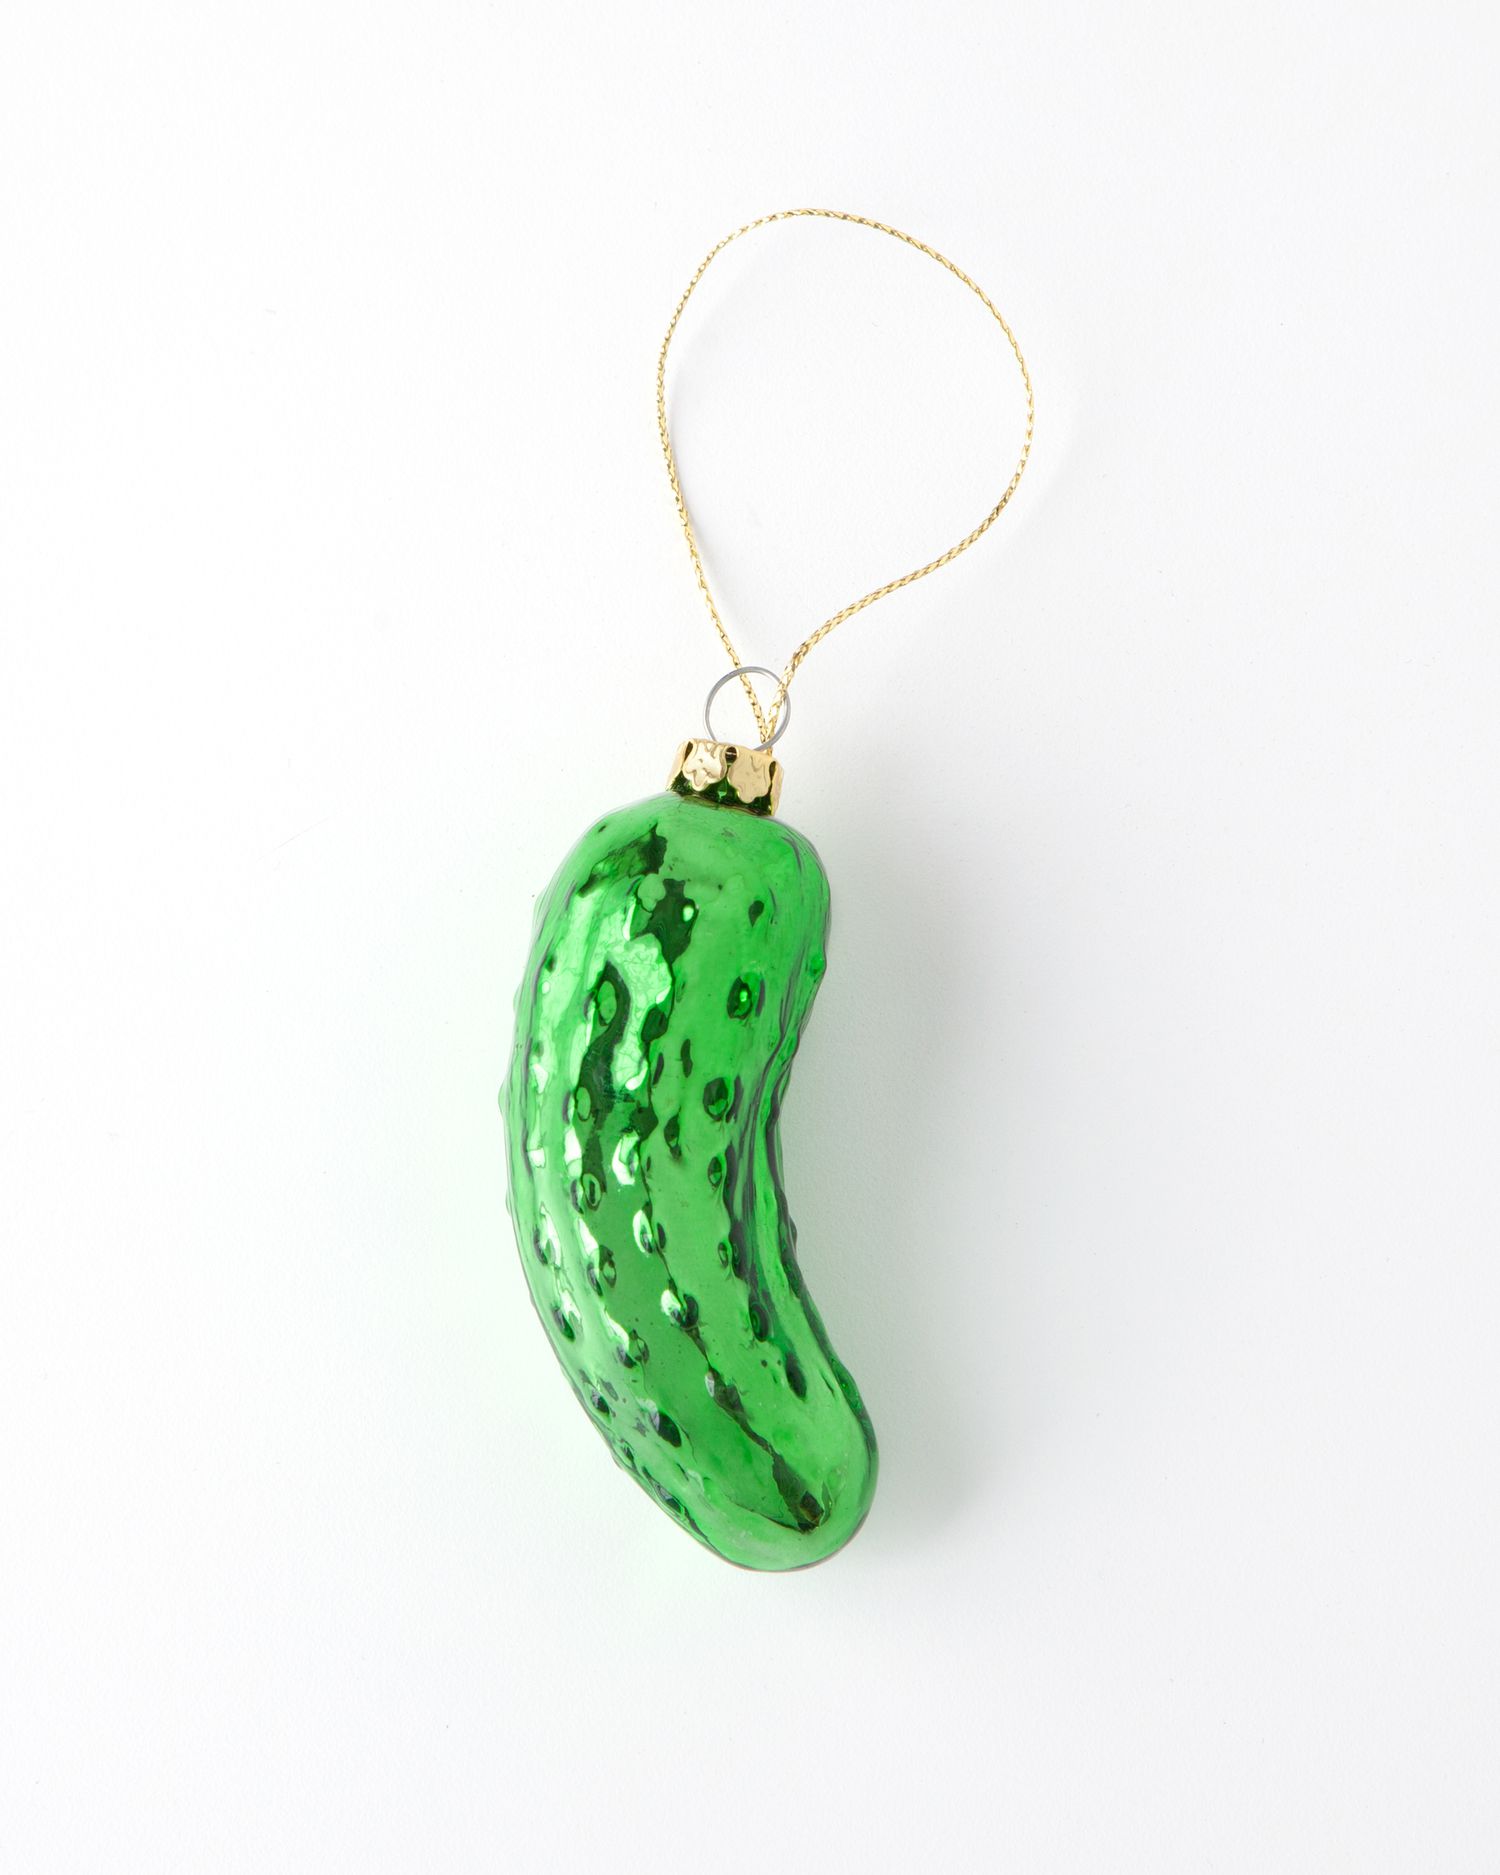 Details about   The Christmas Pickle Tradition Tree Ornament 4 1/2X1.375" W/ Pickle Legend 